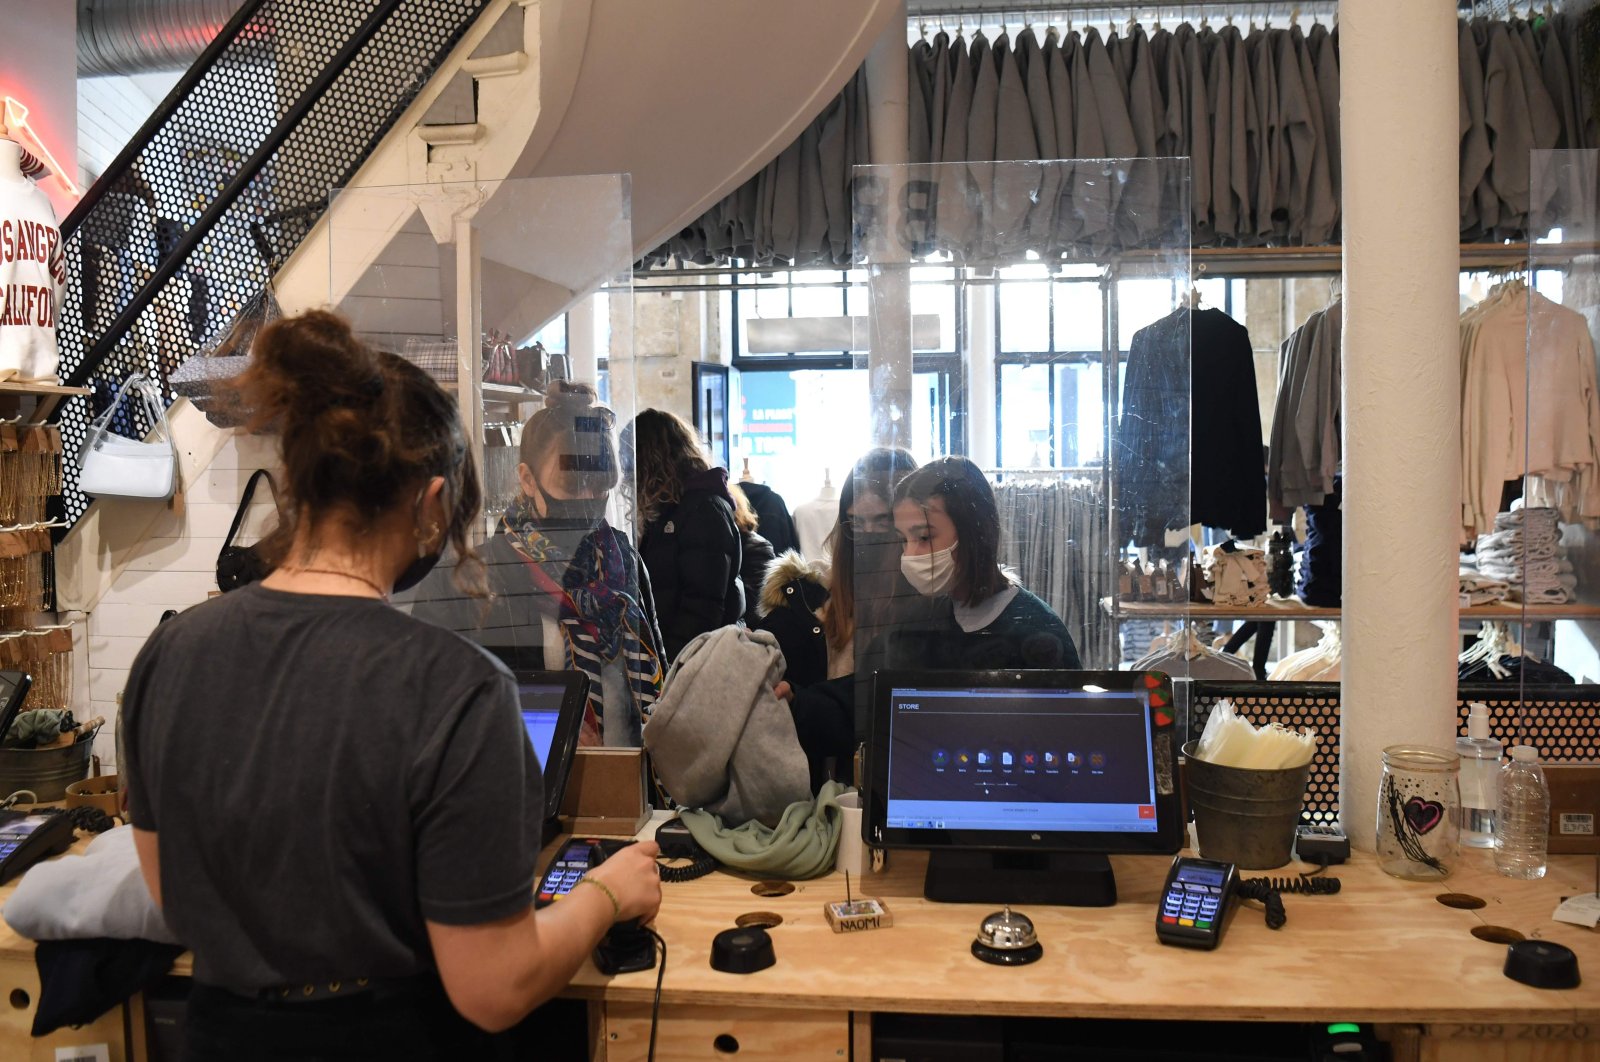 Customers shop in a clothing store after the French government eased COVID-19 lockdown measures and allowed all "nonessential" shops to reopen, Paris, France, Nov. 28, 2020. (AFP Photo)